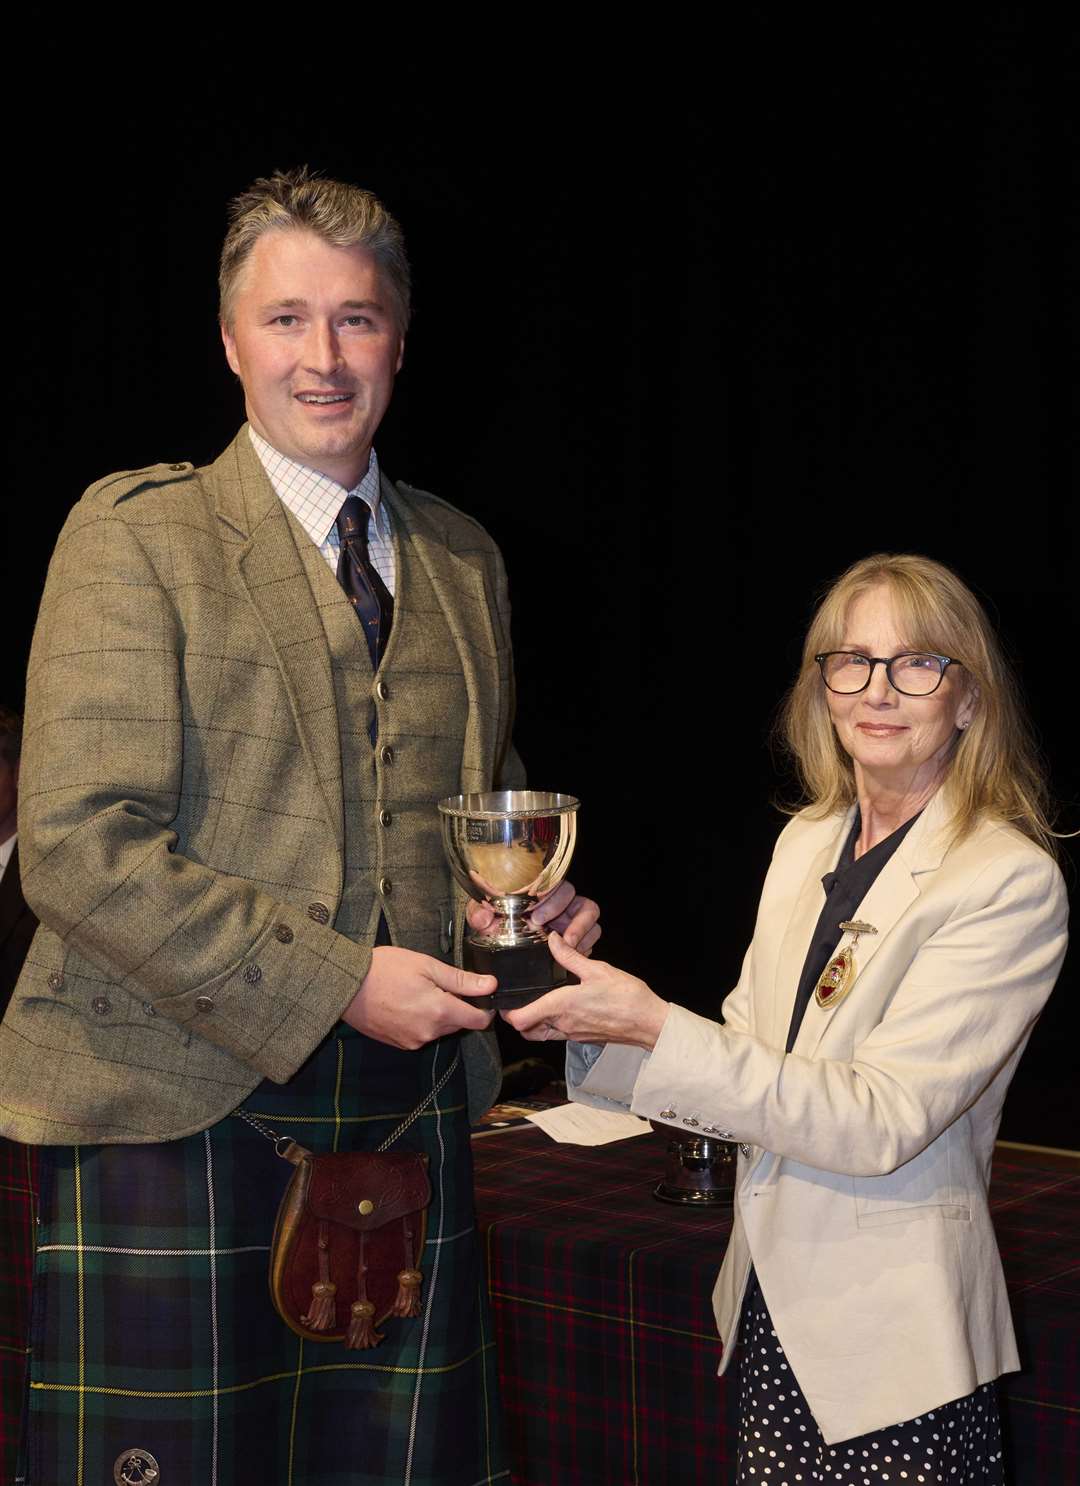 Glynis Campbell-Sinclair (the Provost of Inverness) with Jamie Forrester who won the 2nd Gold Medal at the Northern Meeting 2022 which was held at Eden Court in Inverness.